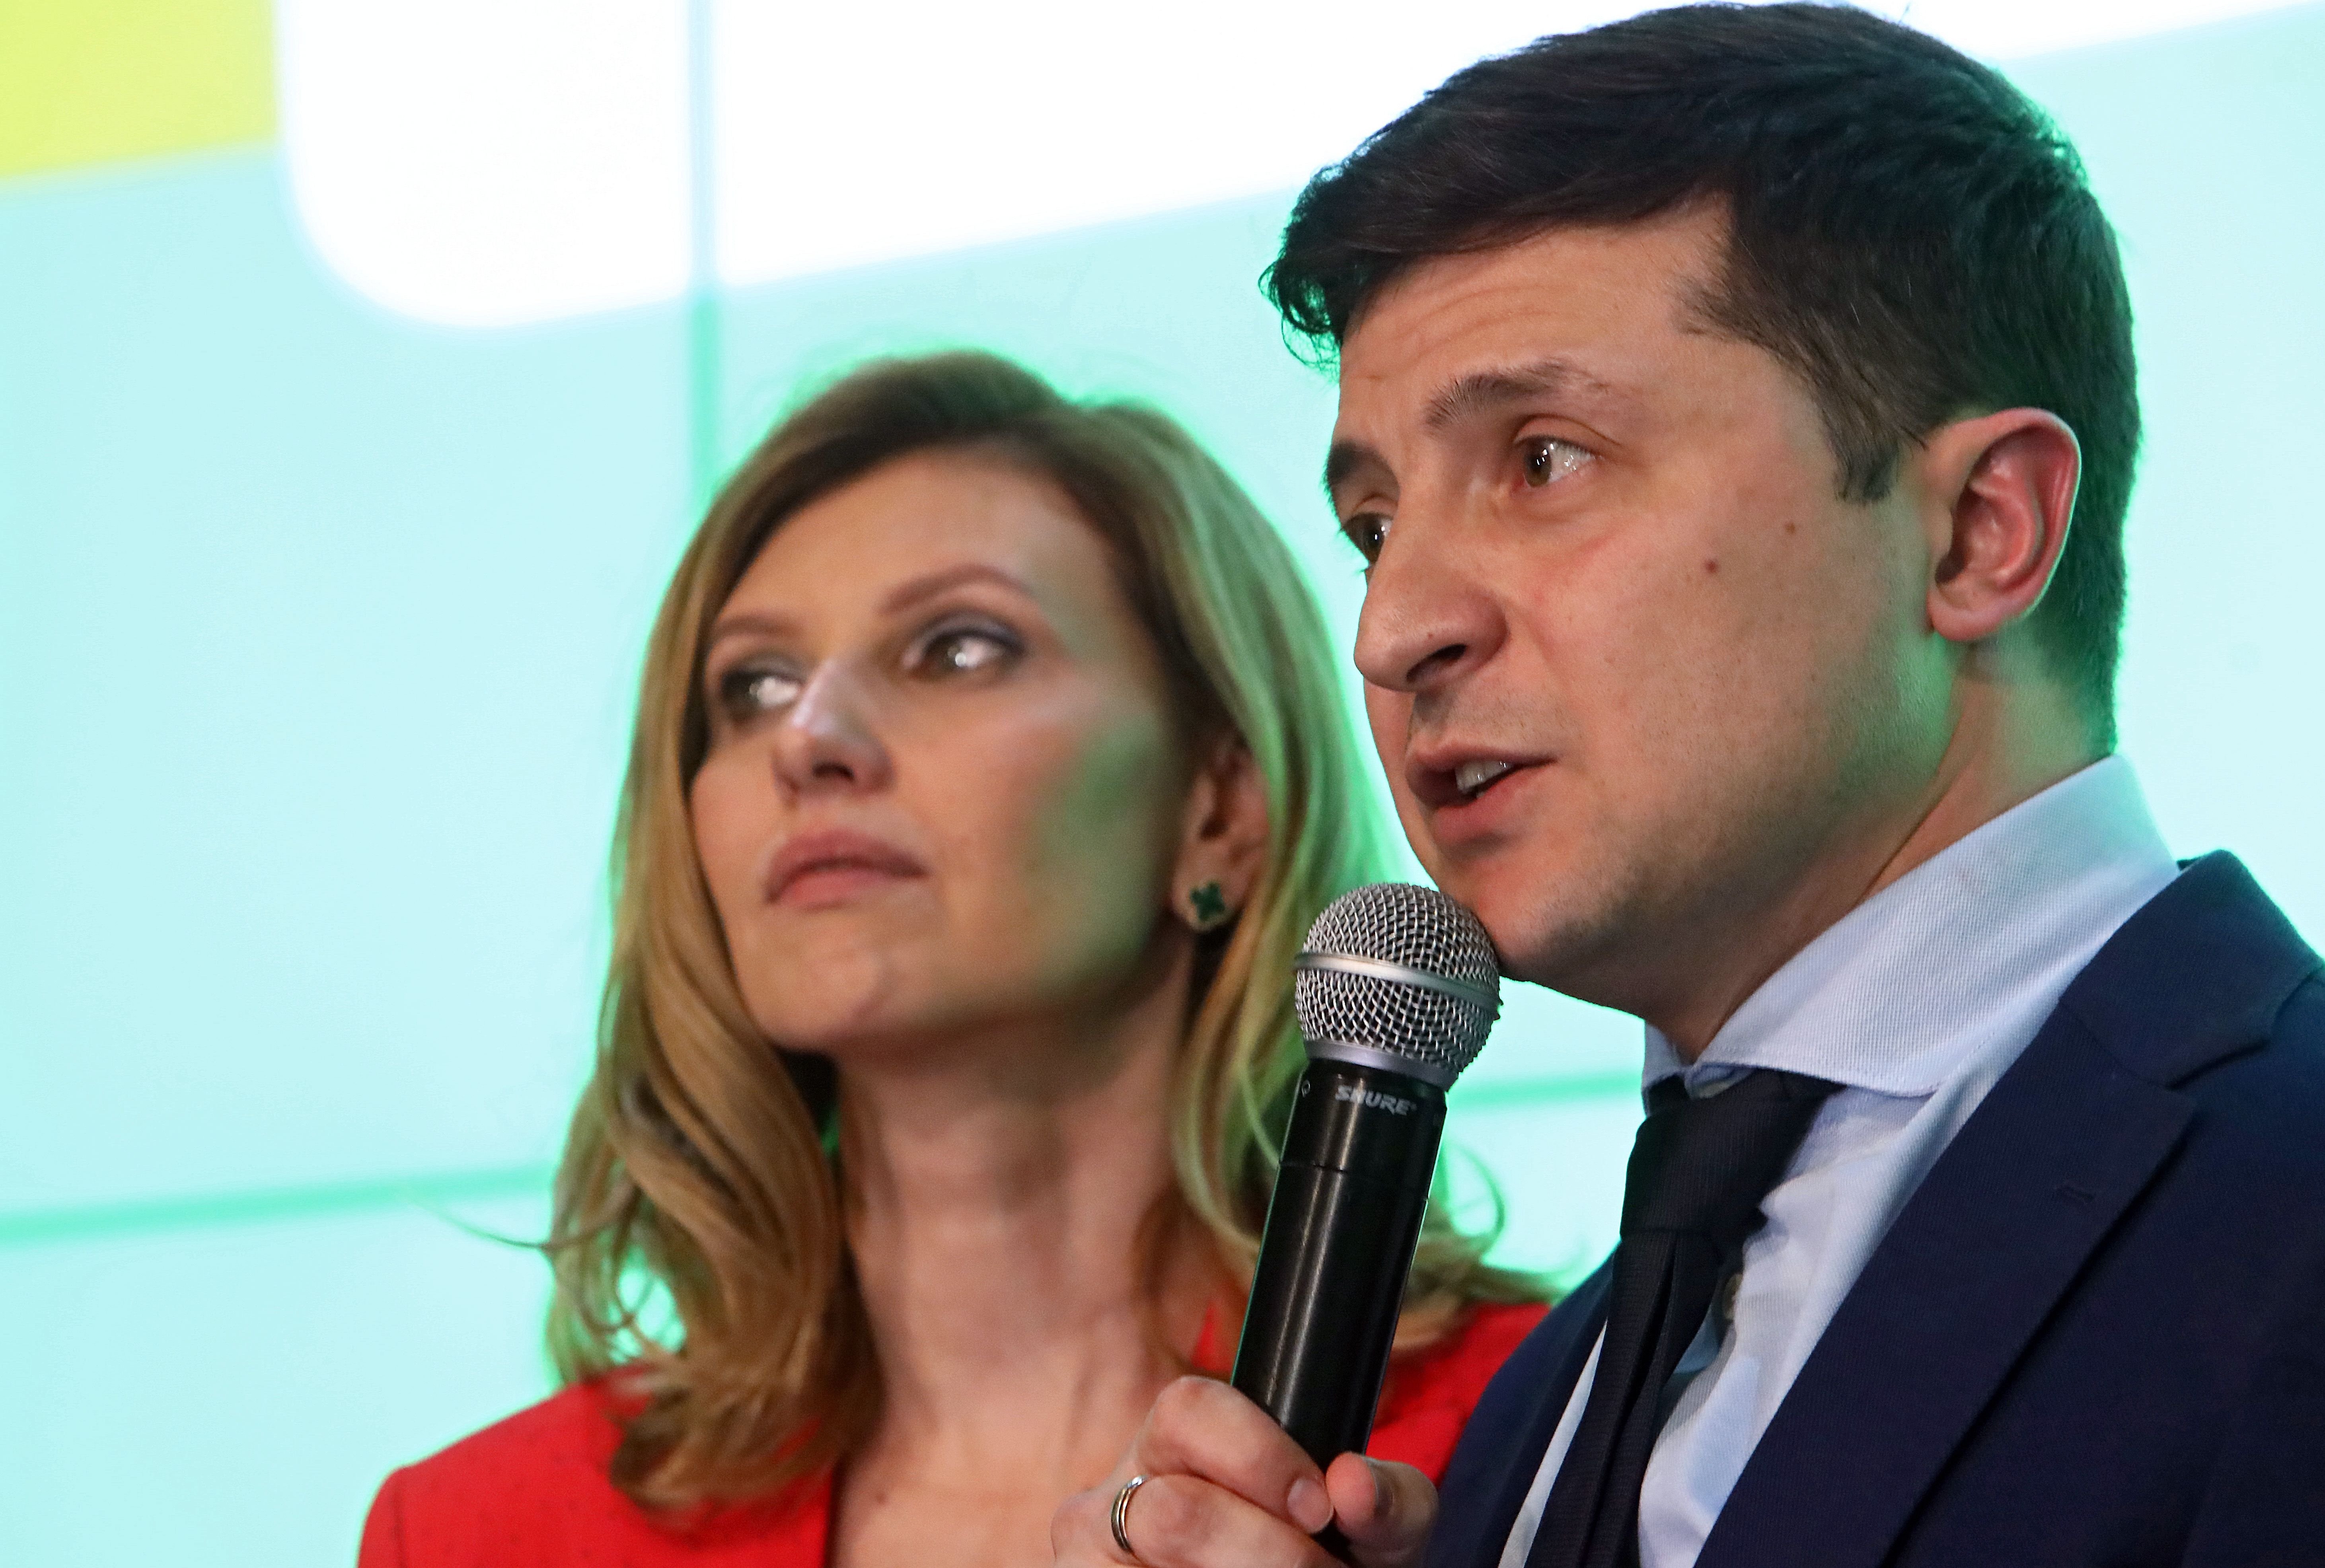 Candidate for presidency of Ukraine Volodymyr Zelenskyi and Olena Zelenska during a briefing in Kyiv, Ukraine, on March 31, 2019. | Source: Volodymyr Tarasov/Future Publishing/Getty Images